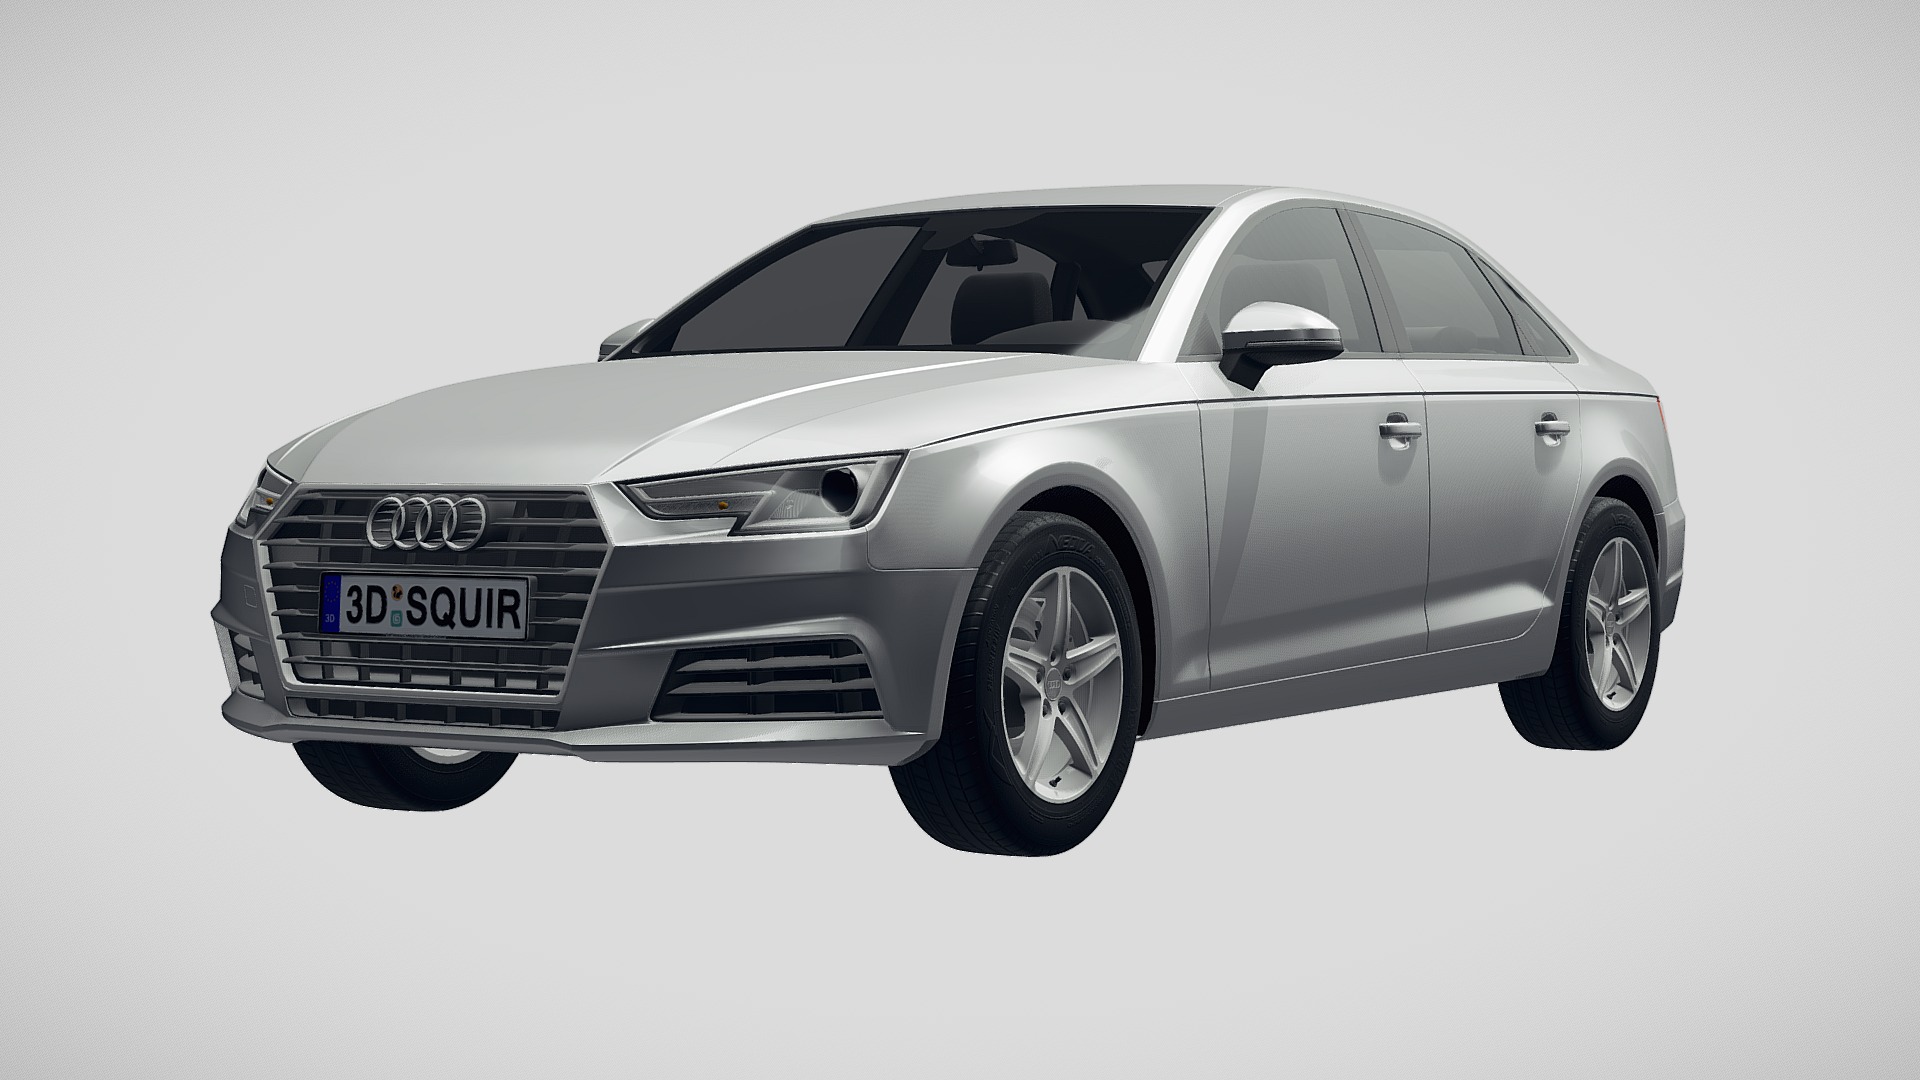 3D model Audi A4 Sedan 2019 - This is a 3D model of the Audi A4 Sedan 2019. The 3D model is about a silver car with a black background.